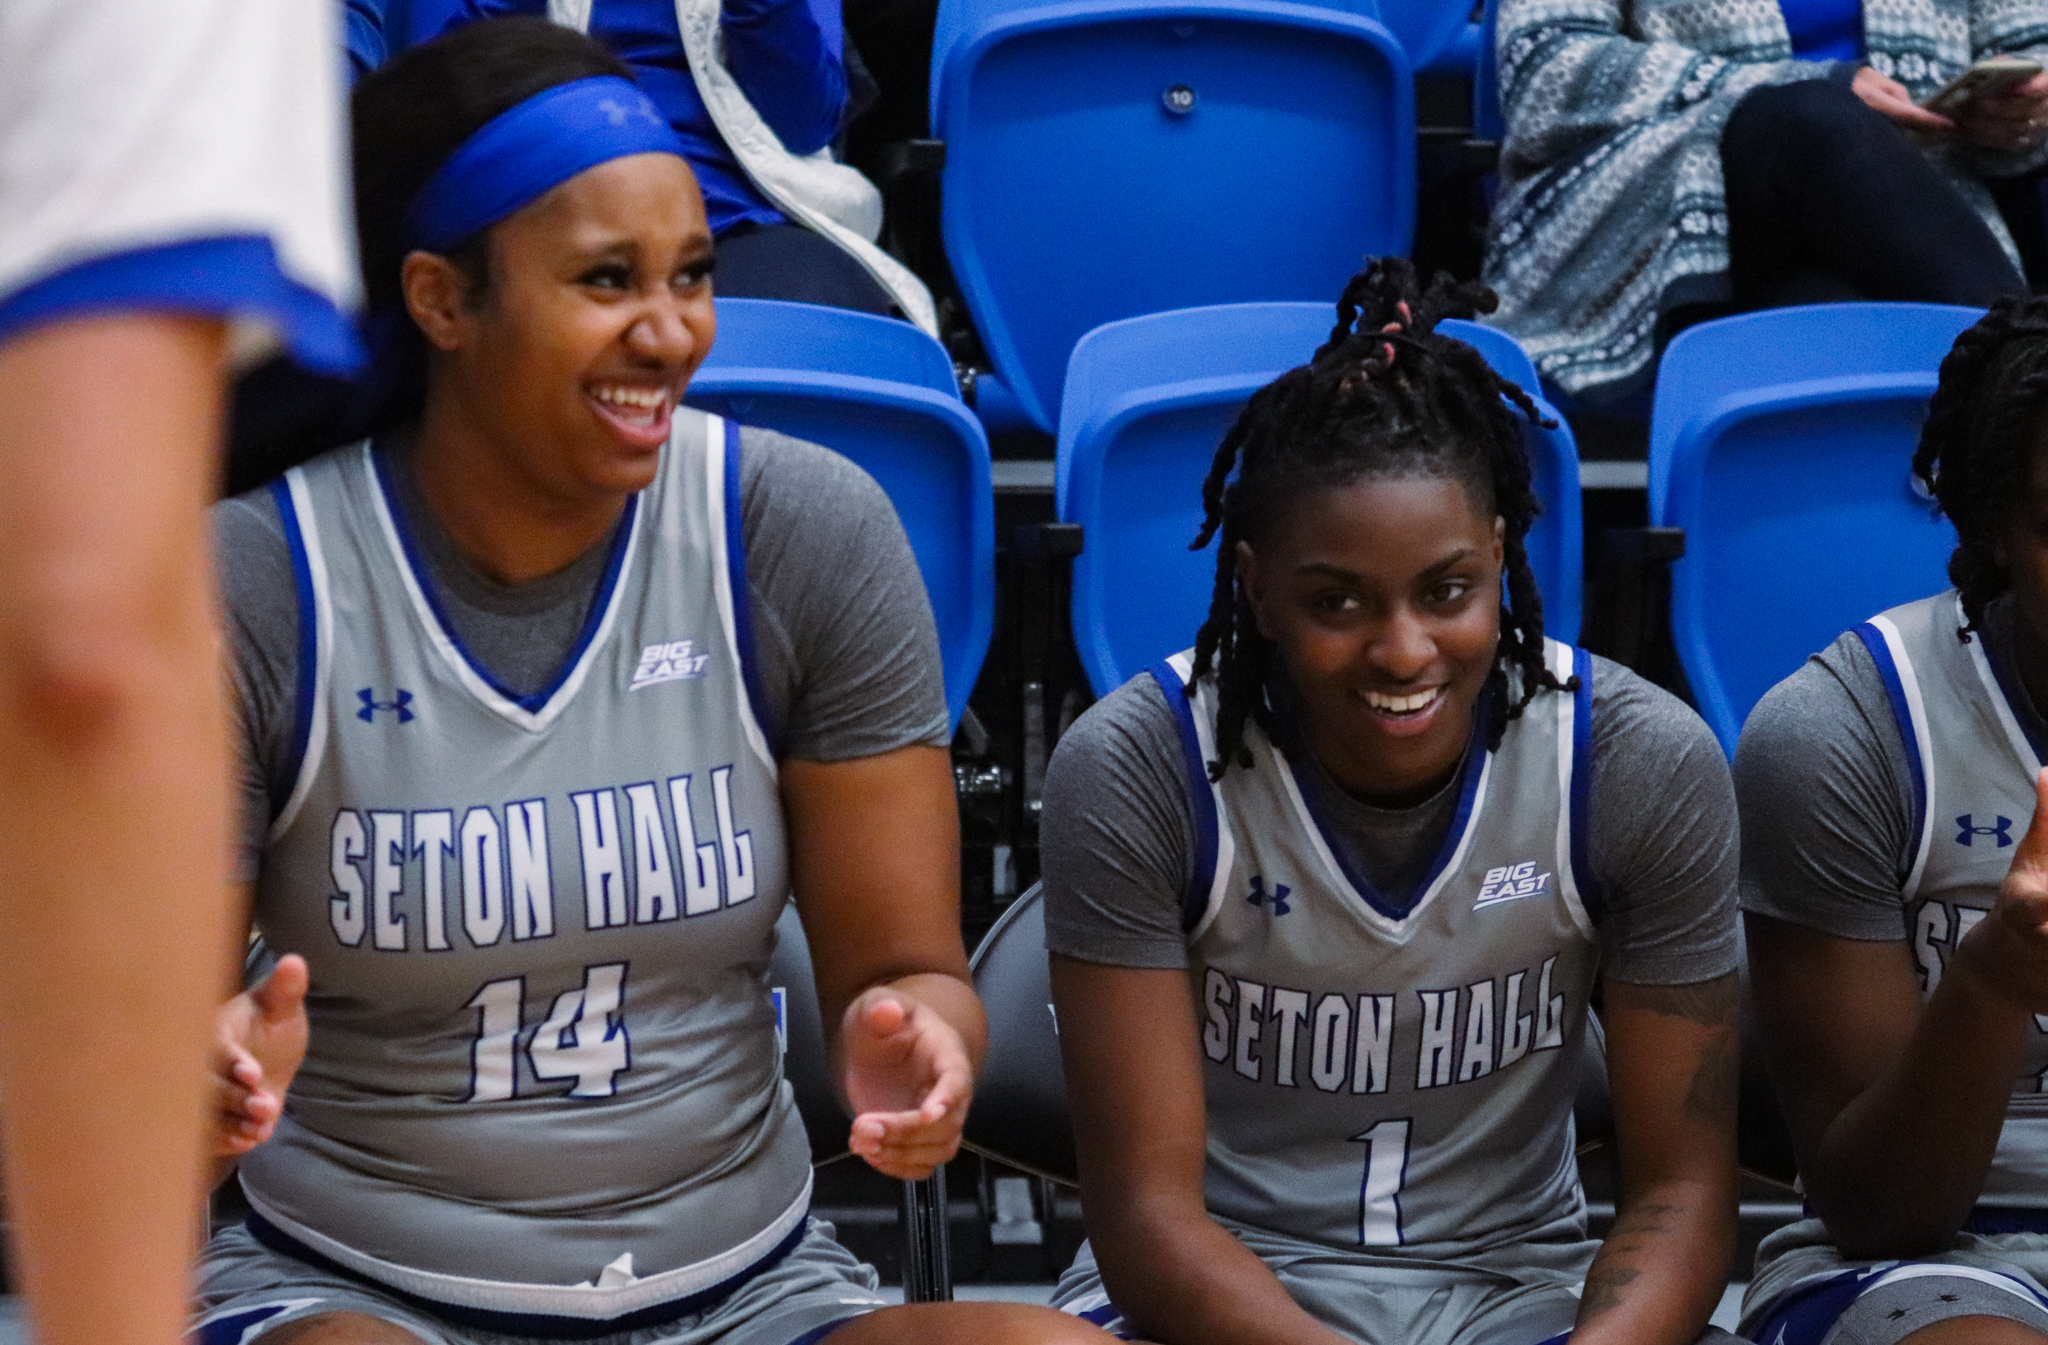 Sidney Cooks and Shay Hagans chat on the bench before getting on the court.